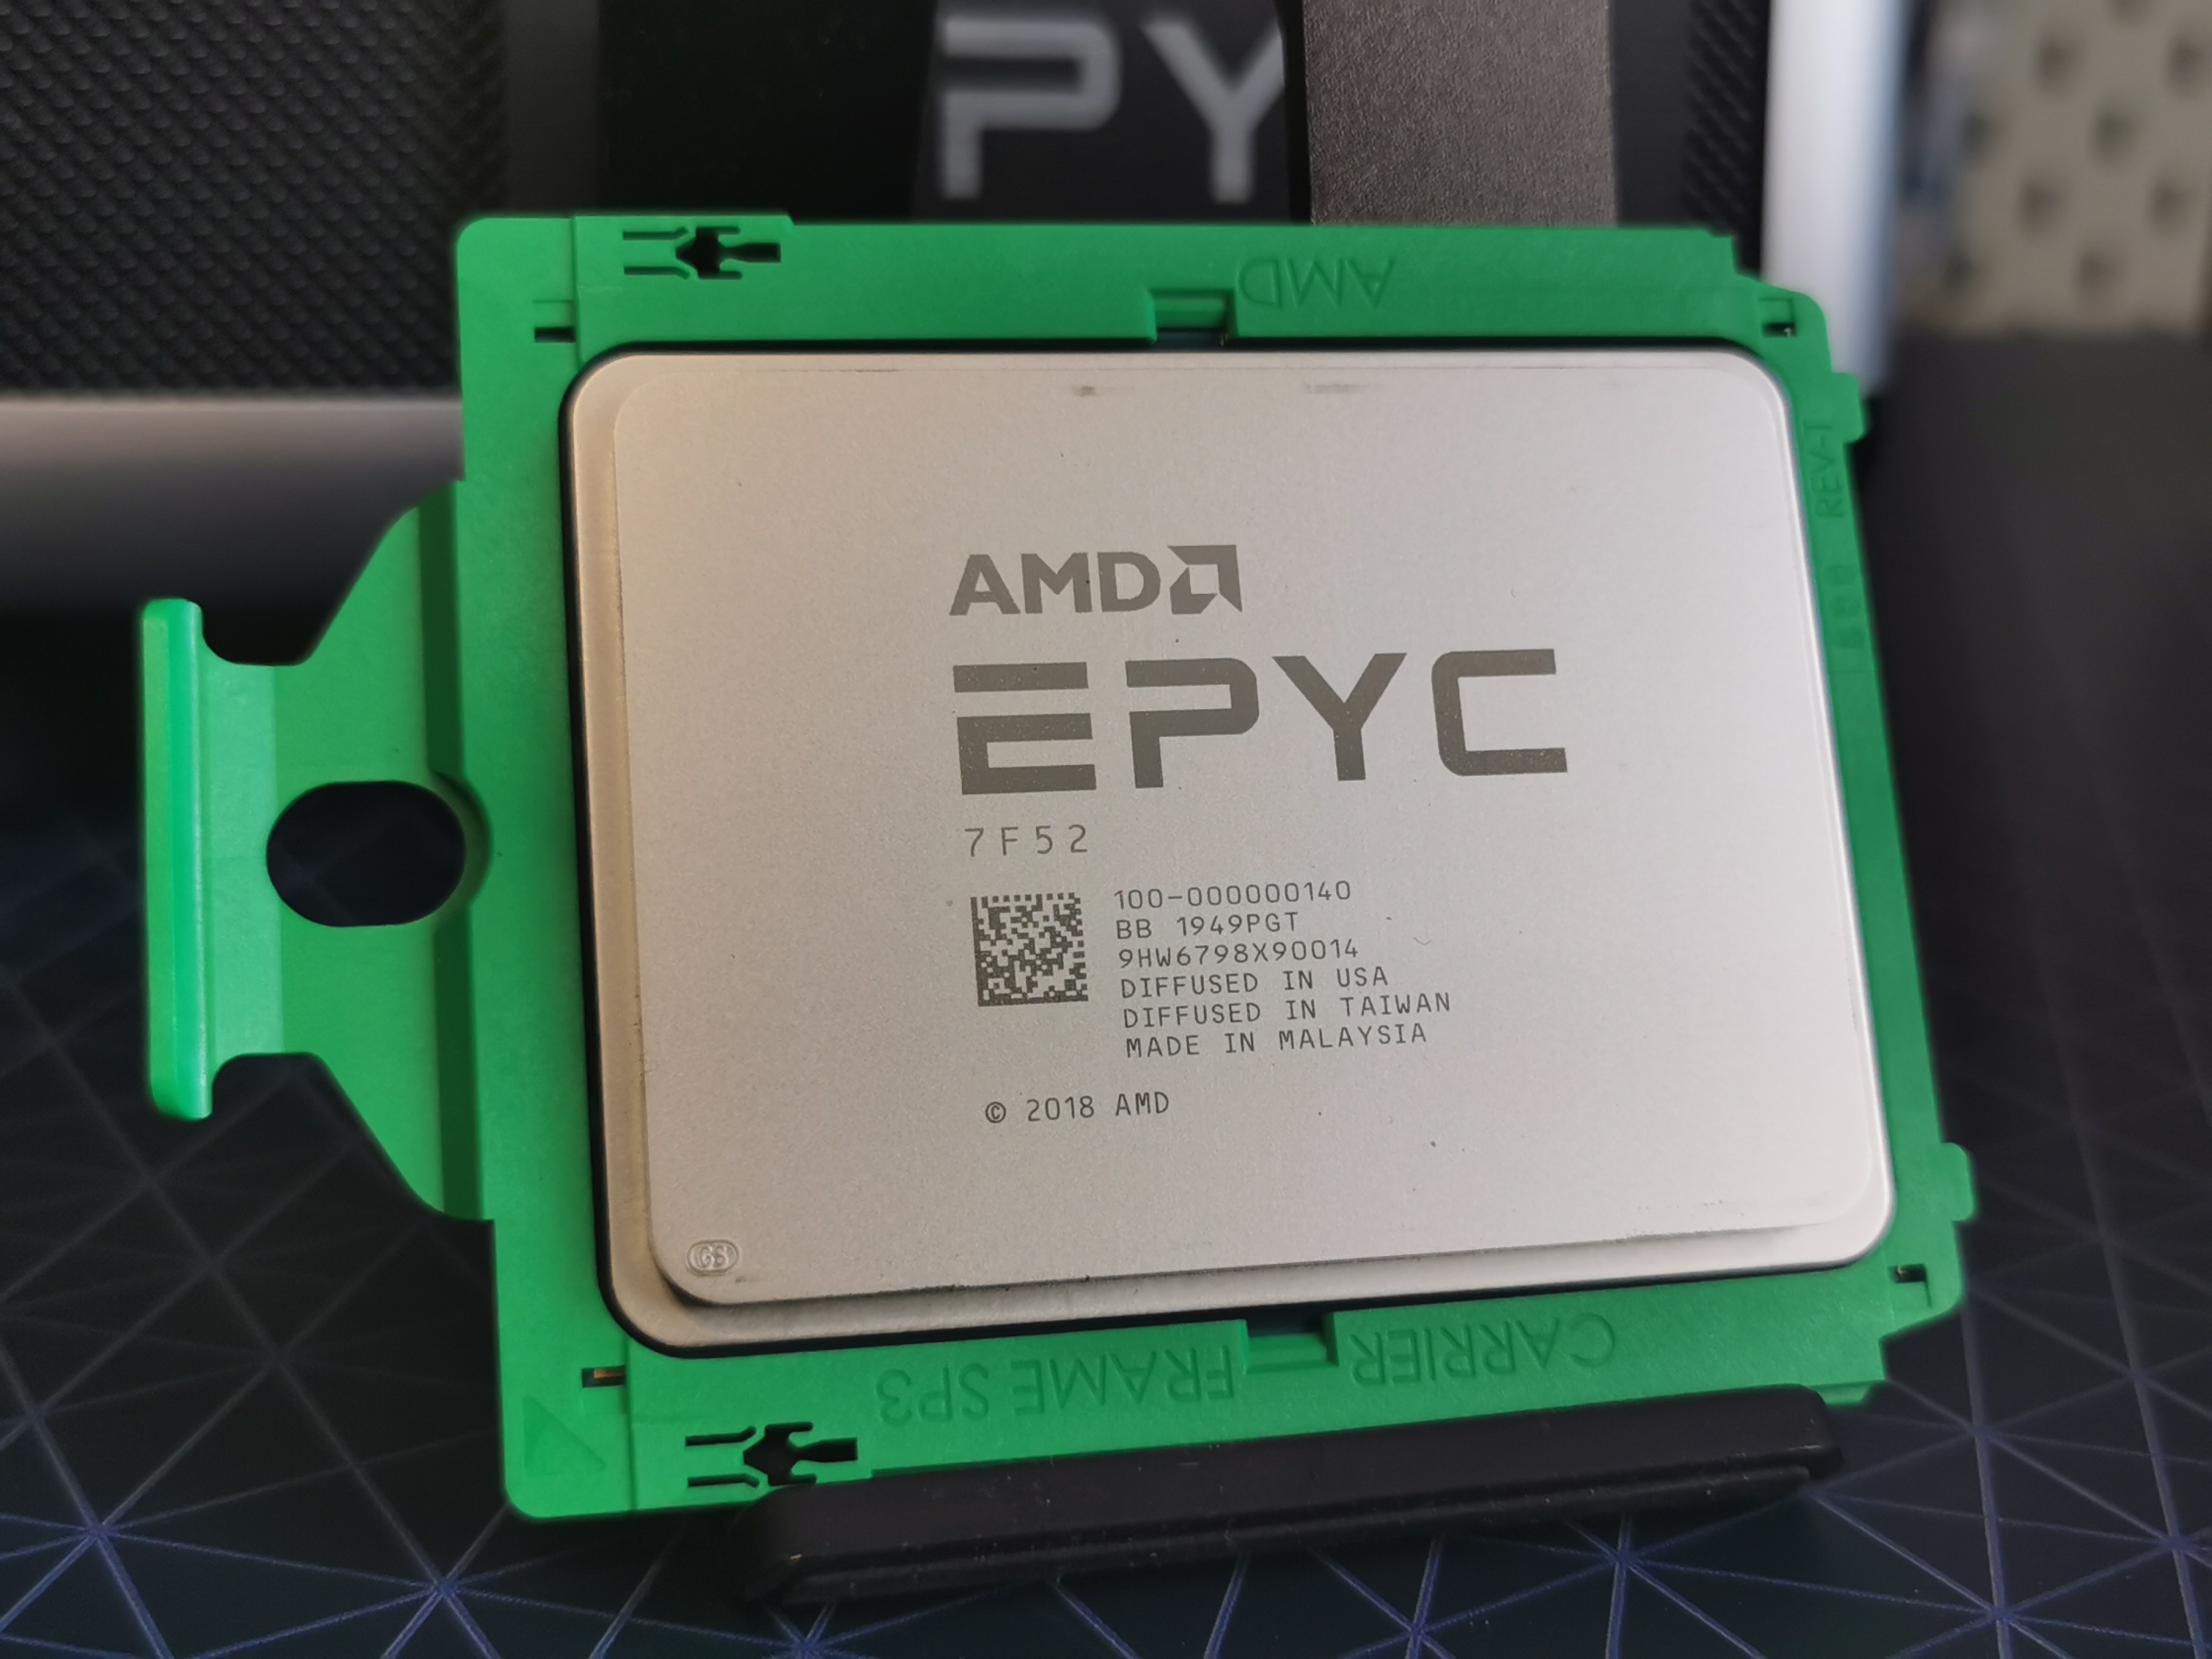 AMD’s New EPYC 7F52 Reviewed The F is for ᴴᴵᴳᴴ Frequency